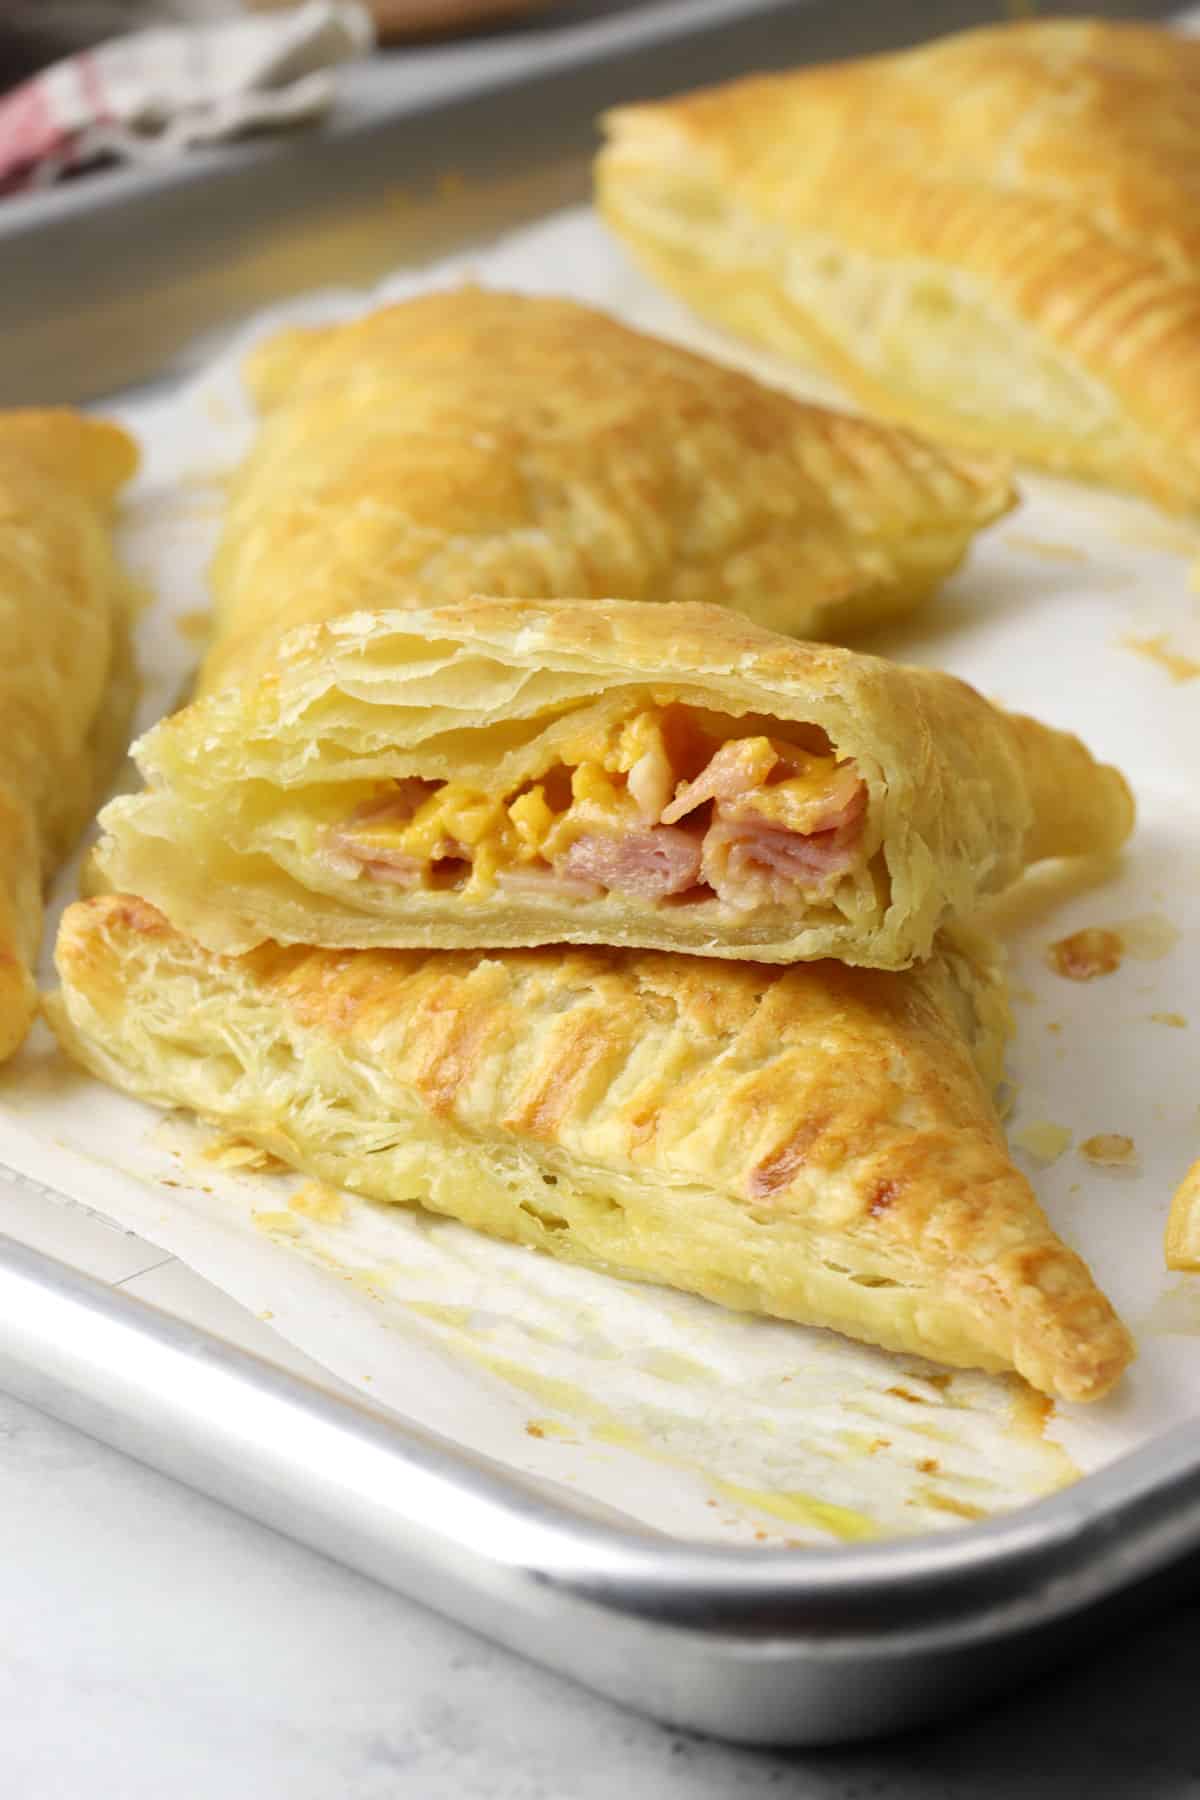 Ham and cheese puff pastry turnover sliced in half to show filling.